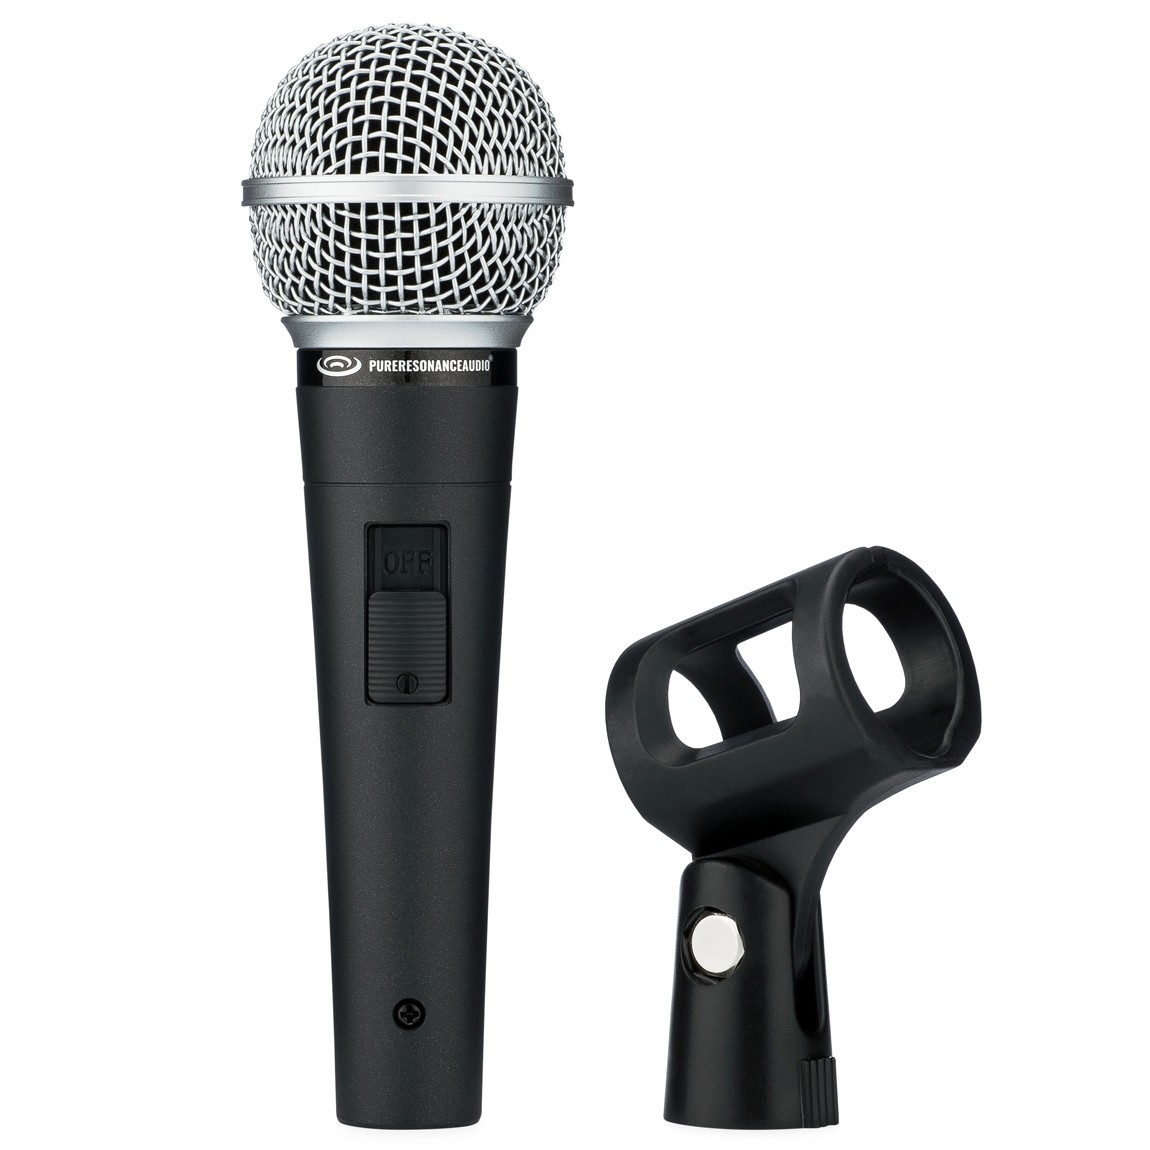 Pure Resonance Audio UC1S Vocal Microphone and Clip